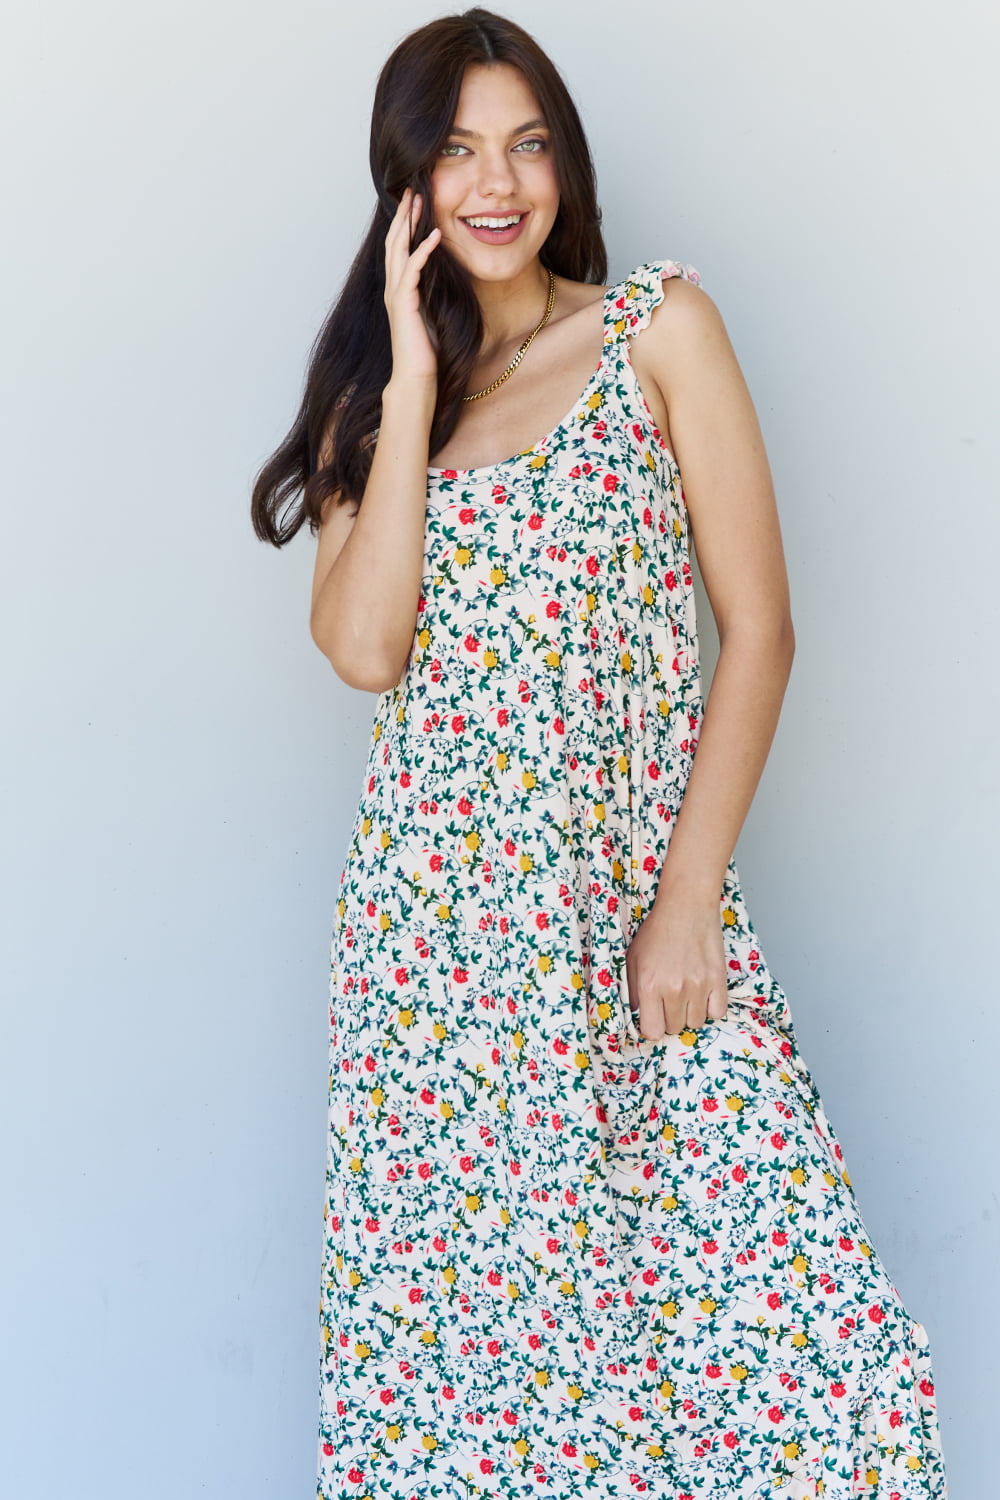 Darla In The Garden Ruffle Floral Maxi Dress in Natural Rose - Coco and lulu boutique 